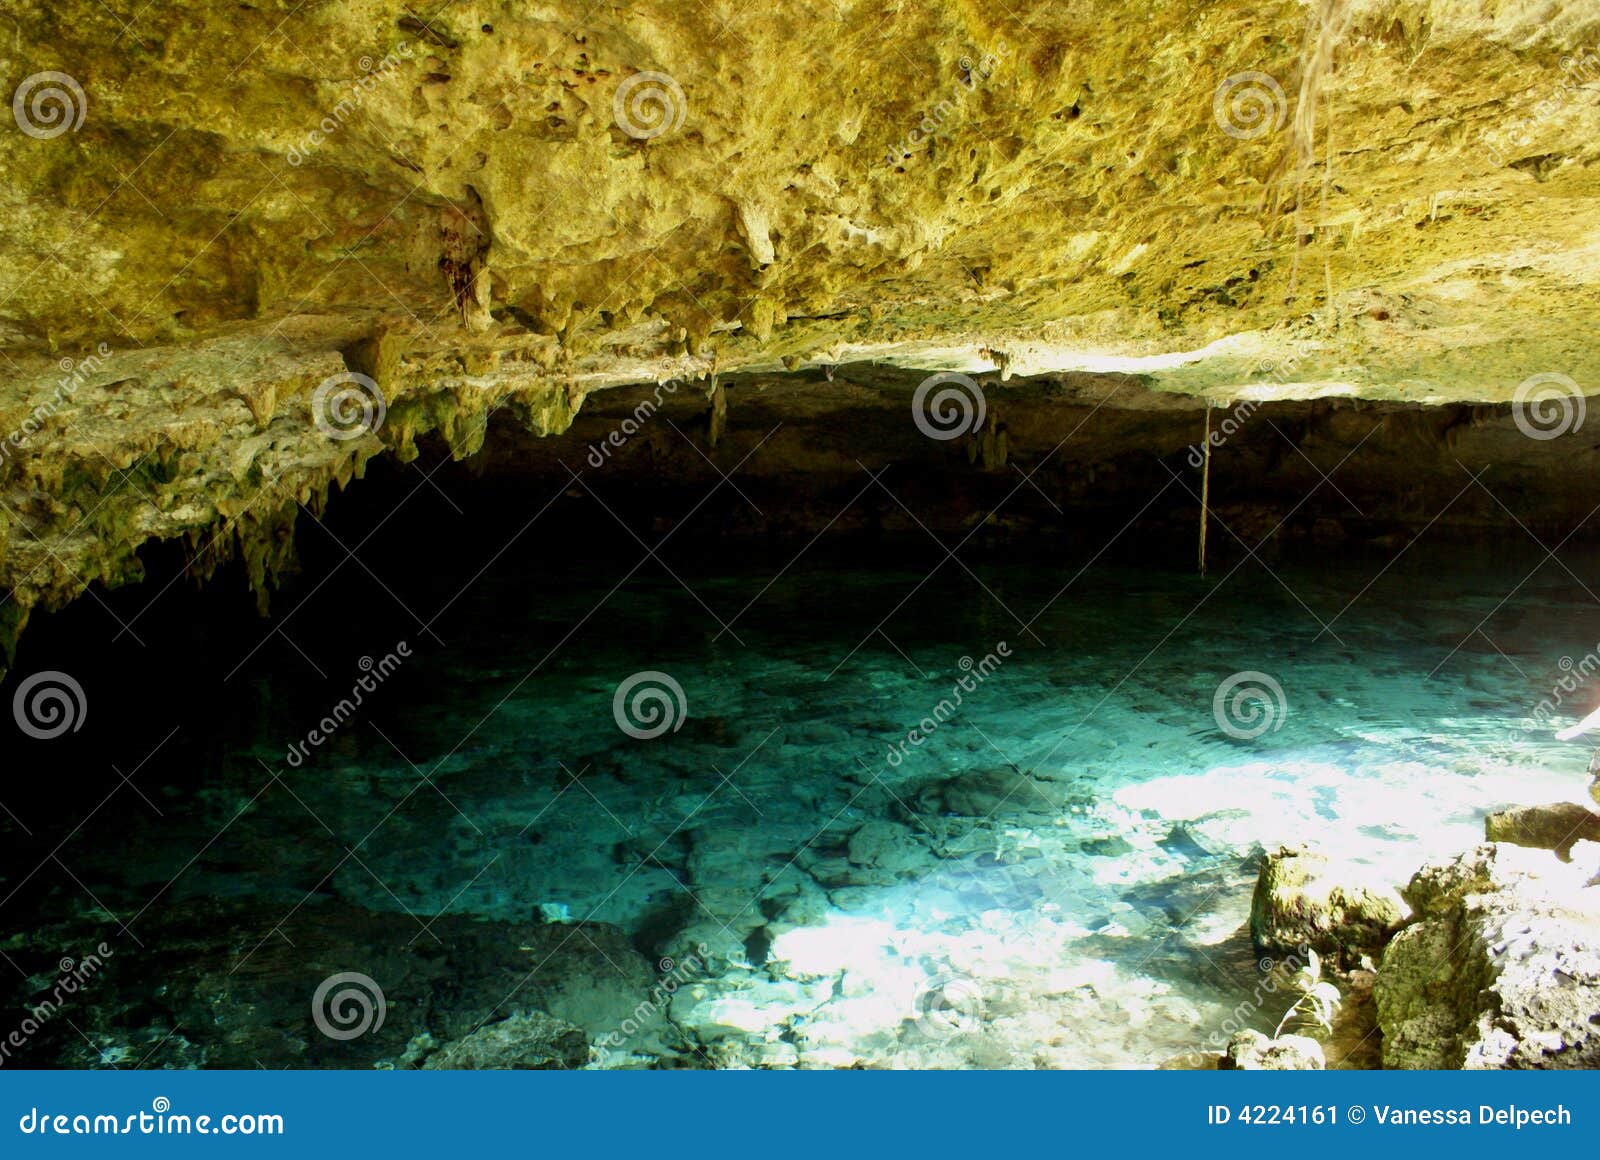 two eyes cenote